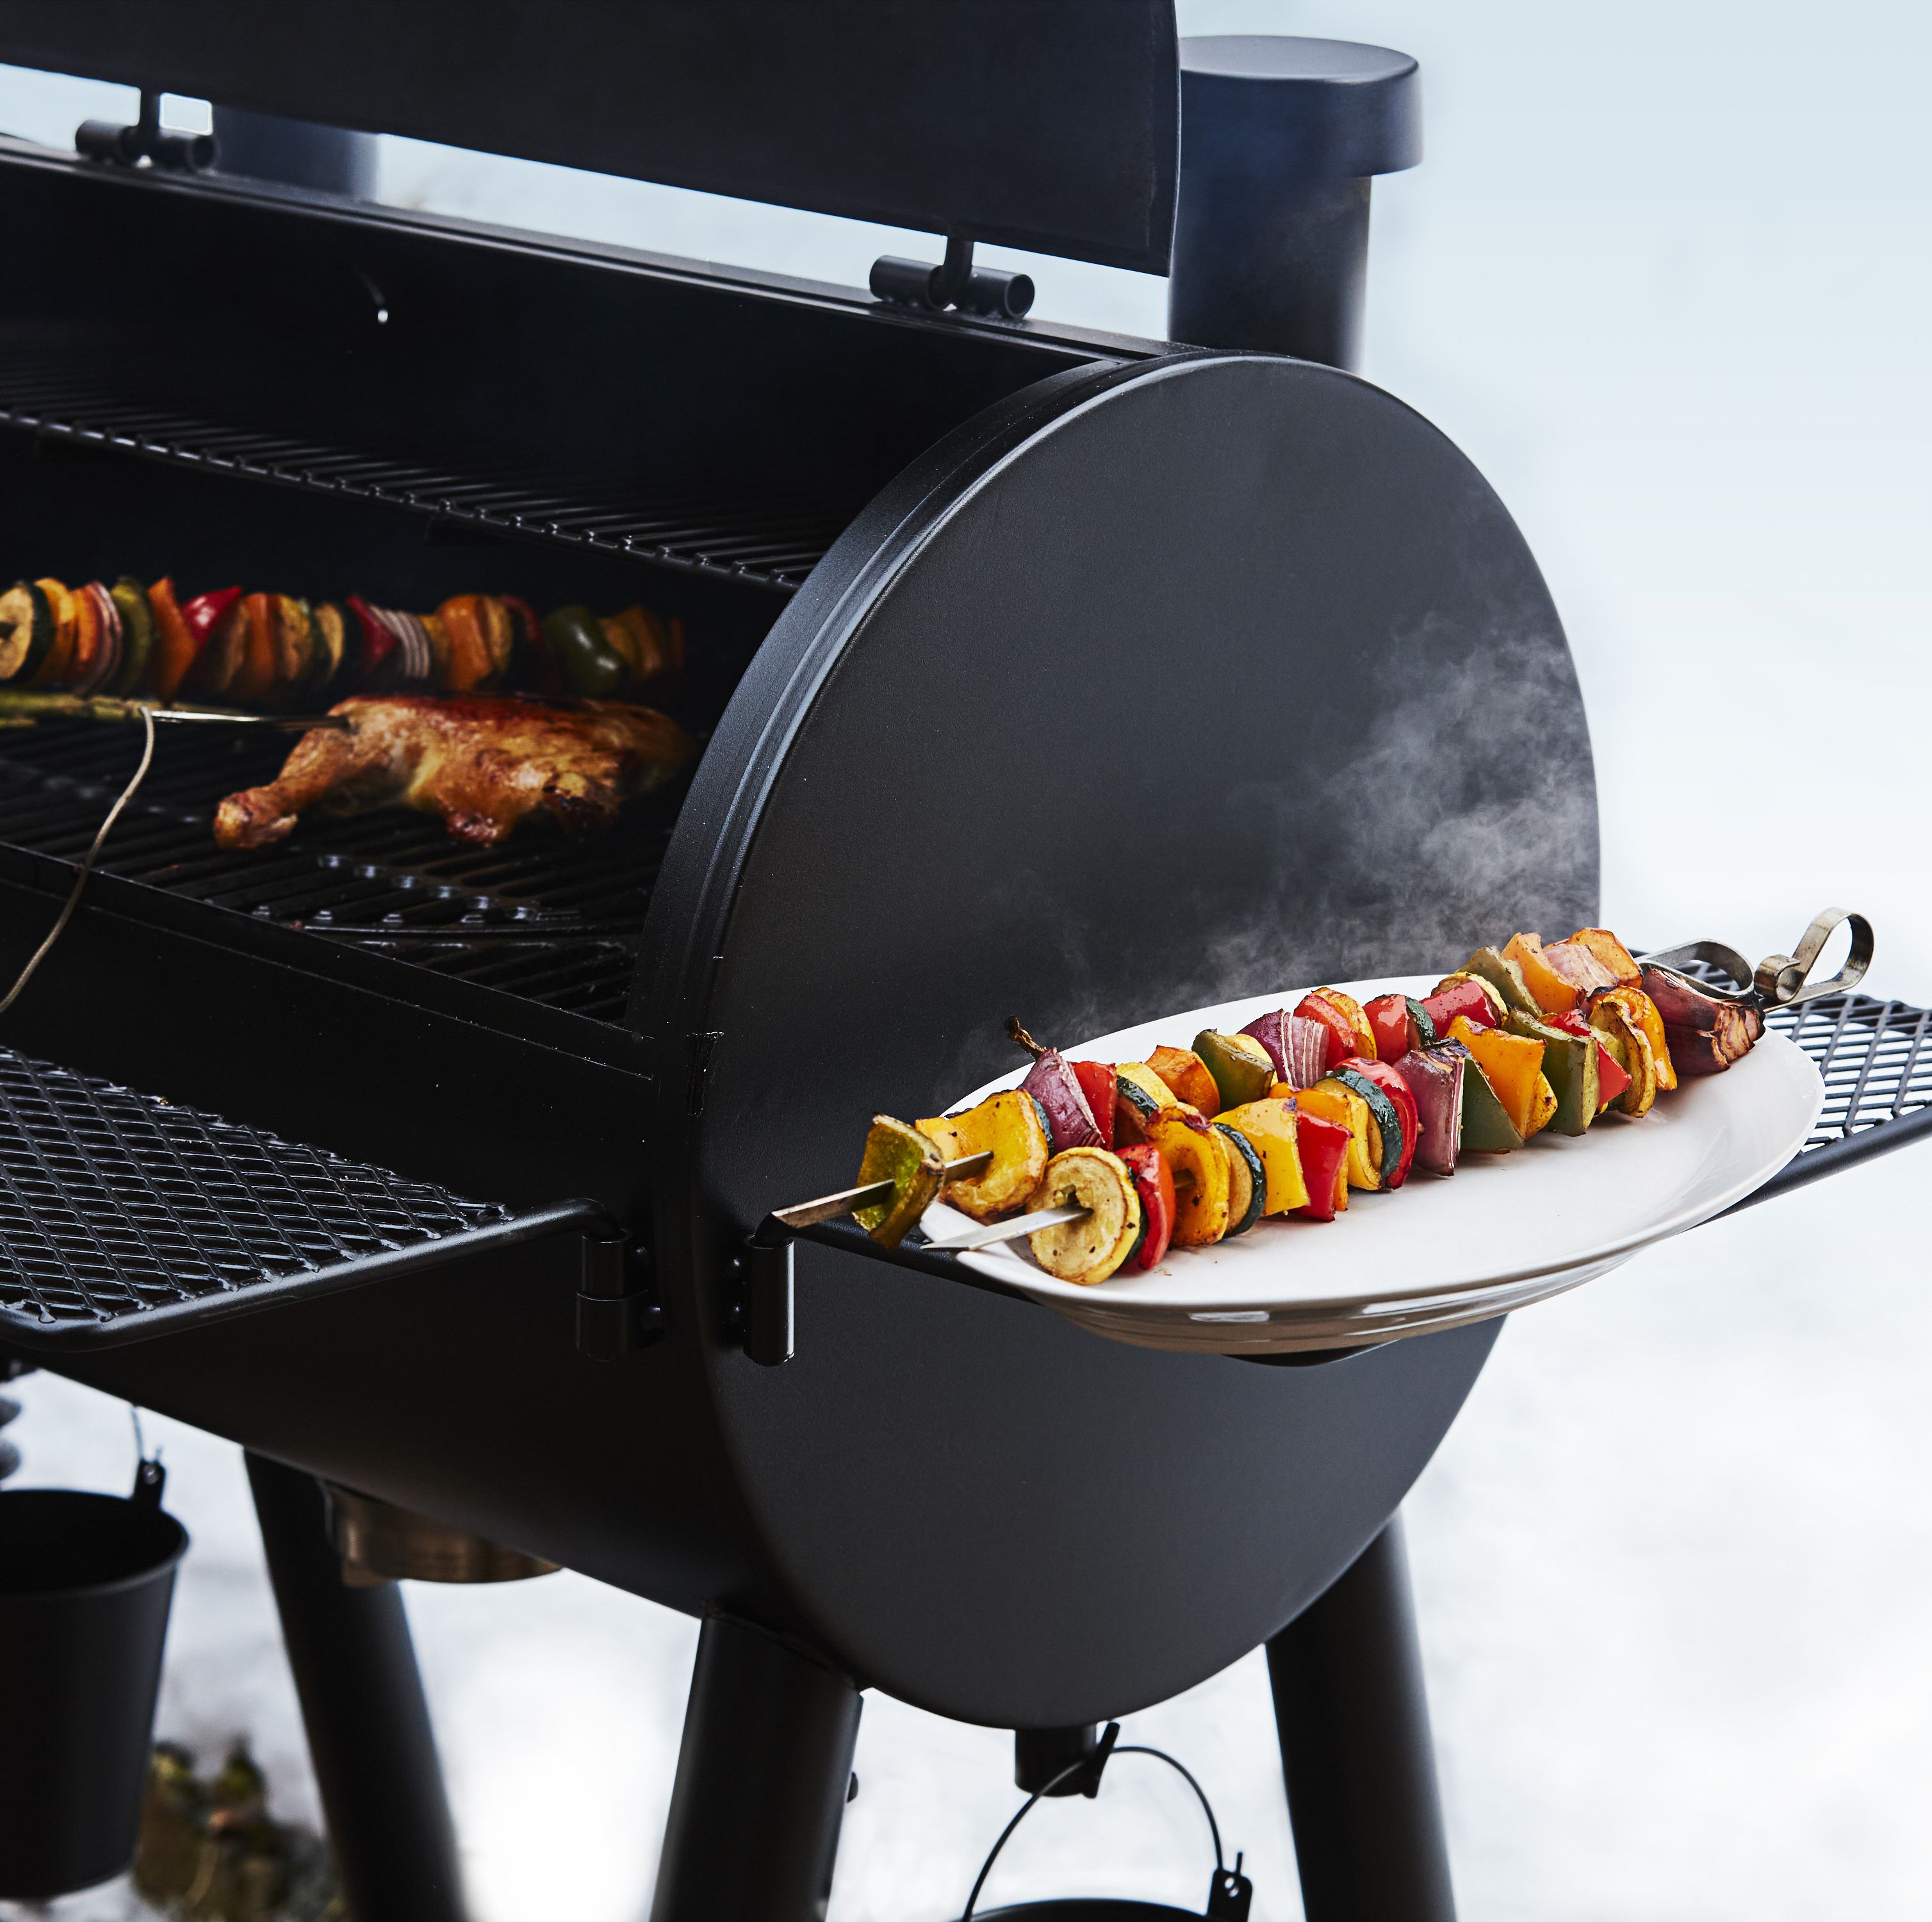 Upgrade to a Pellet Grill This Spring for Easy Outdoor Cooking